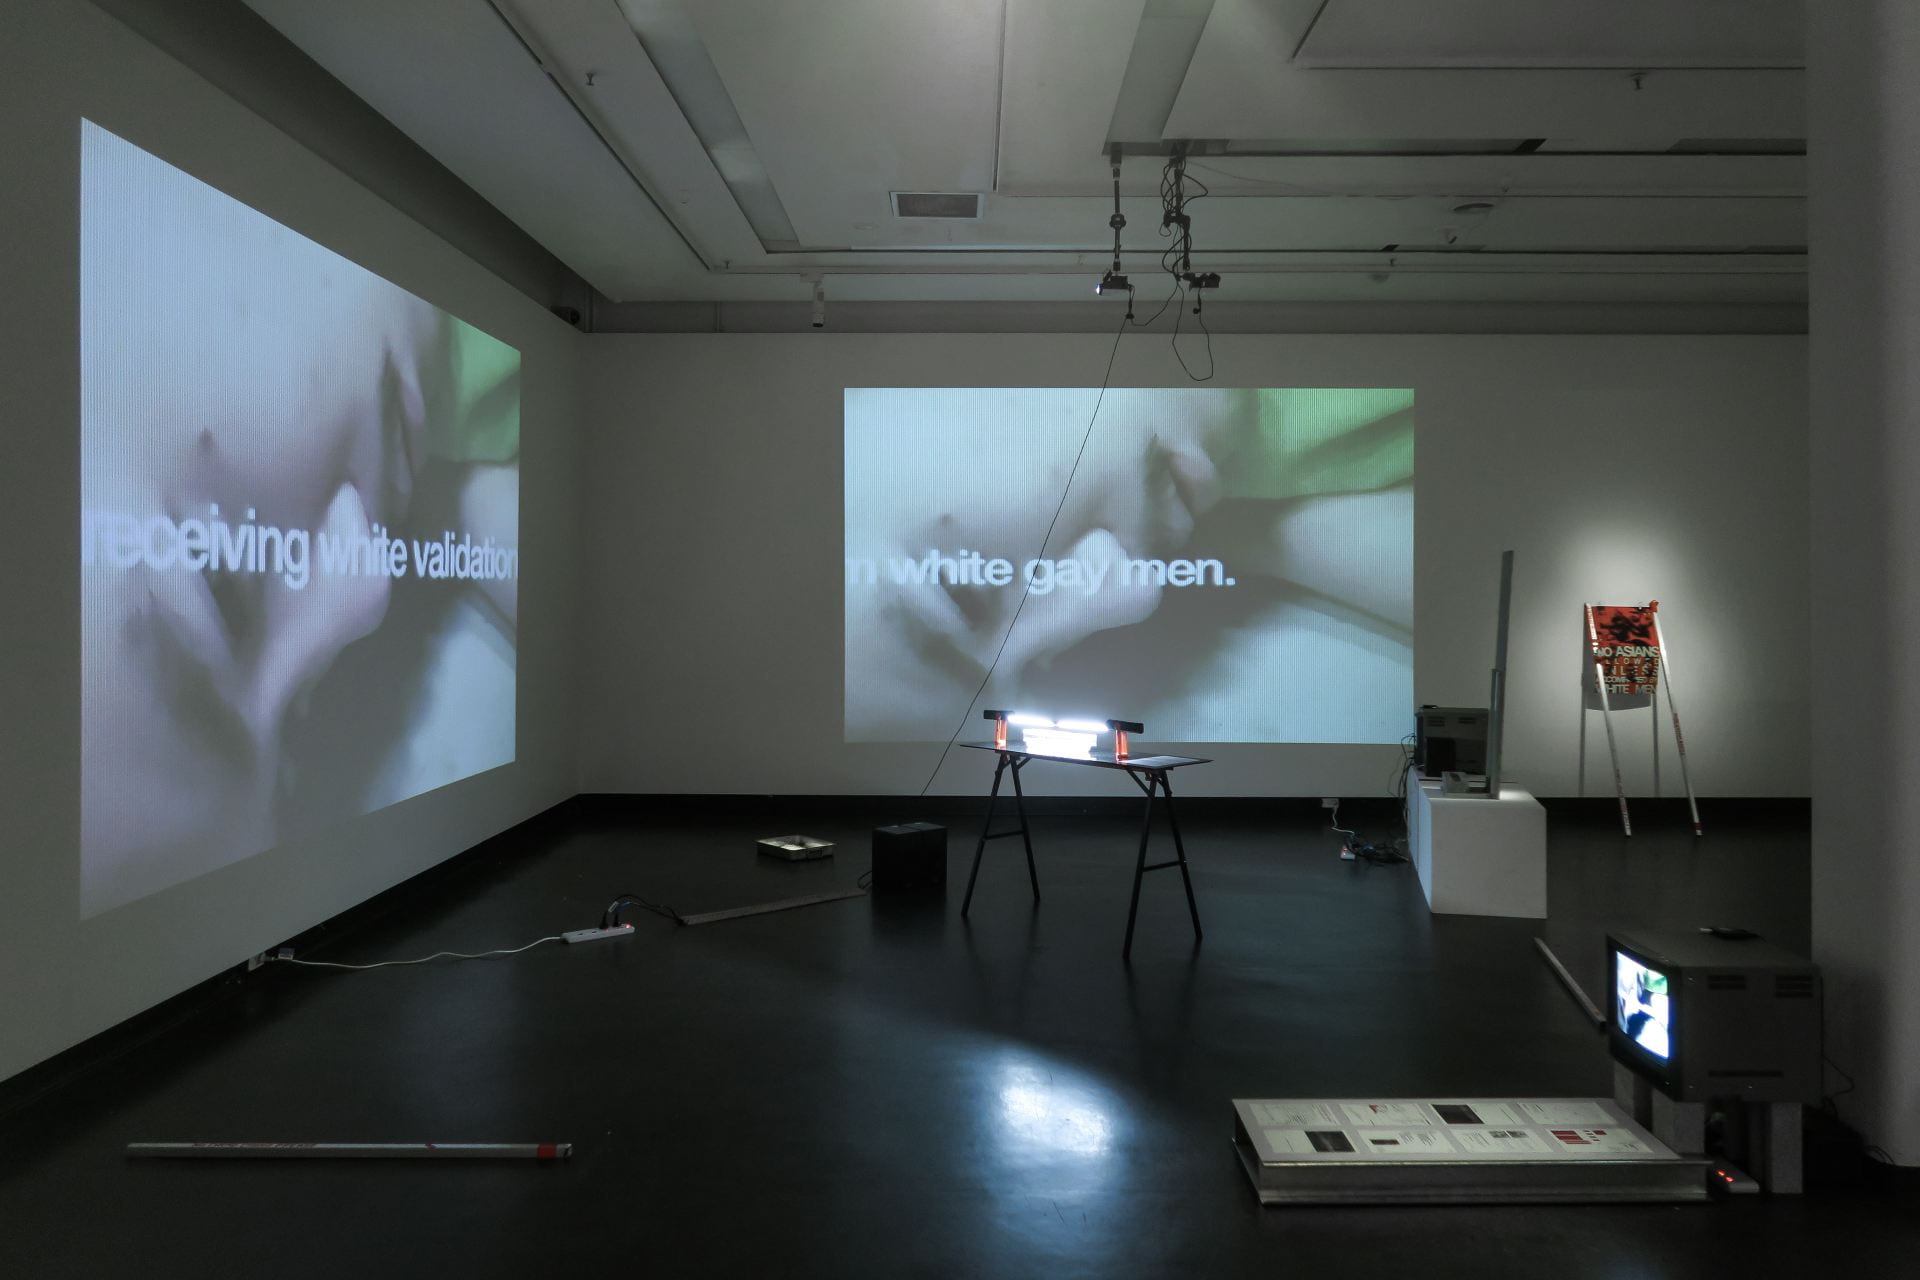 an image of the 'miscegenasian' project in a gallery, containing two projections, a trestle table, two videos on CRT televisions, steel beams on the ground, and a sign that reads 'No Asians Allowed Unless Accompanied By White Men'.